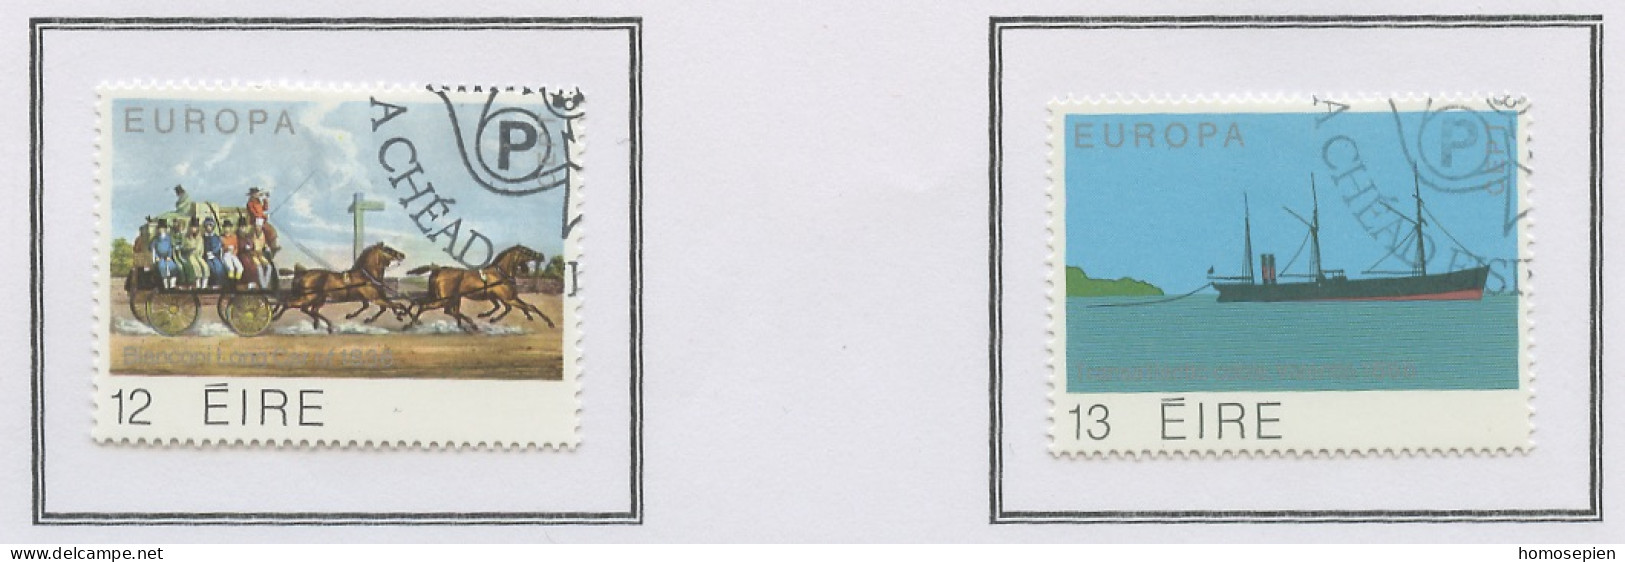 Irlande - Ireland - Irland 1979 Y&T N°415 à 416 - Michel N°412 à 413 (o) - EUROPA - Used Stamps